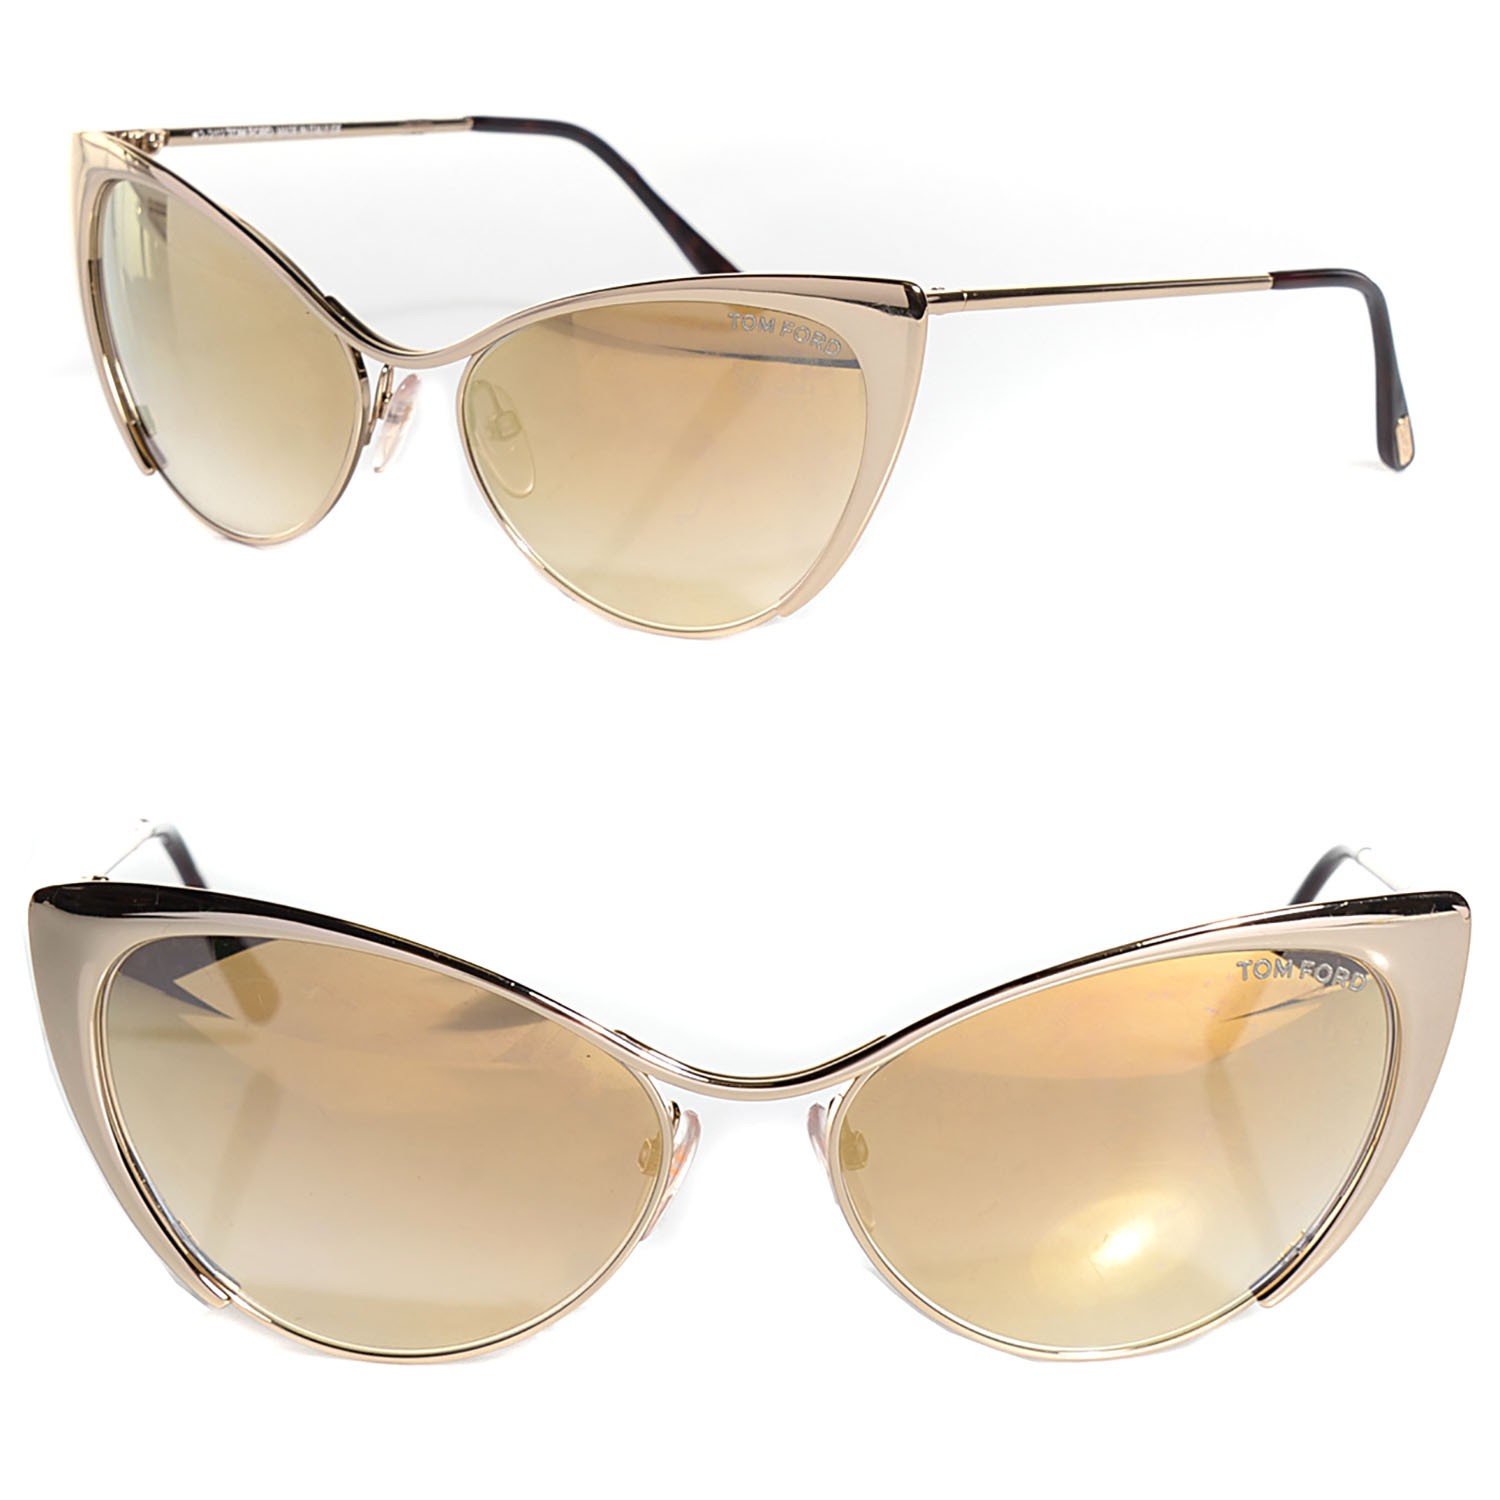 Tom Ford Cat Eye Acetate And Gold Tone Sunglasses